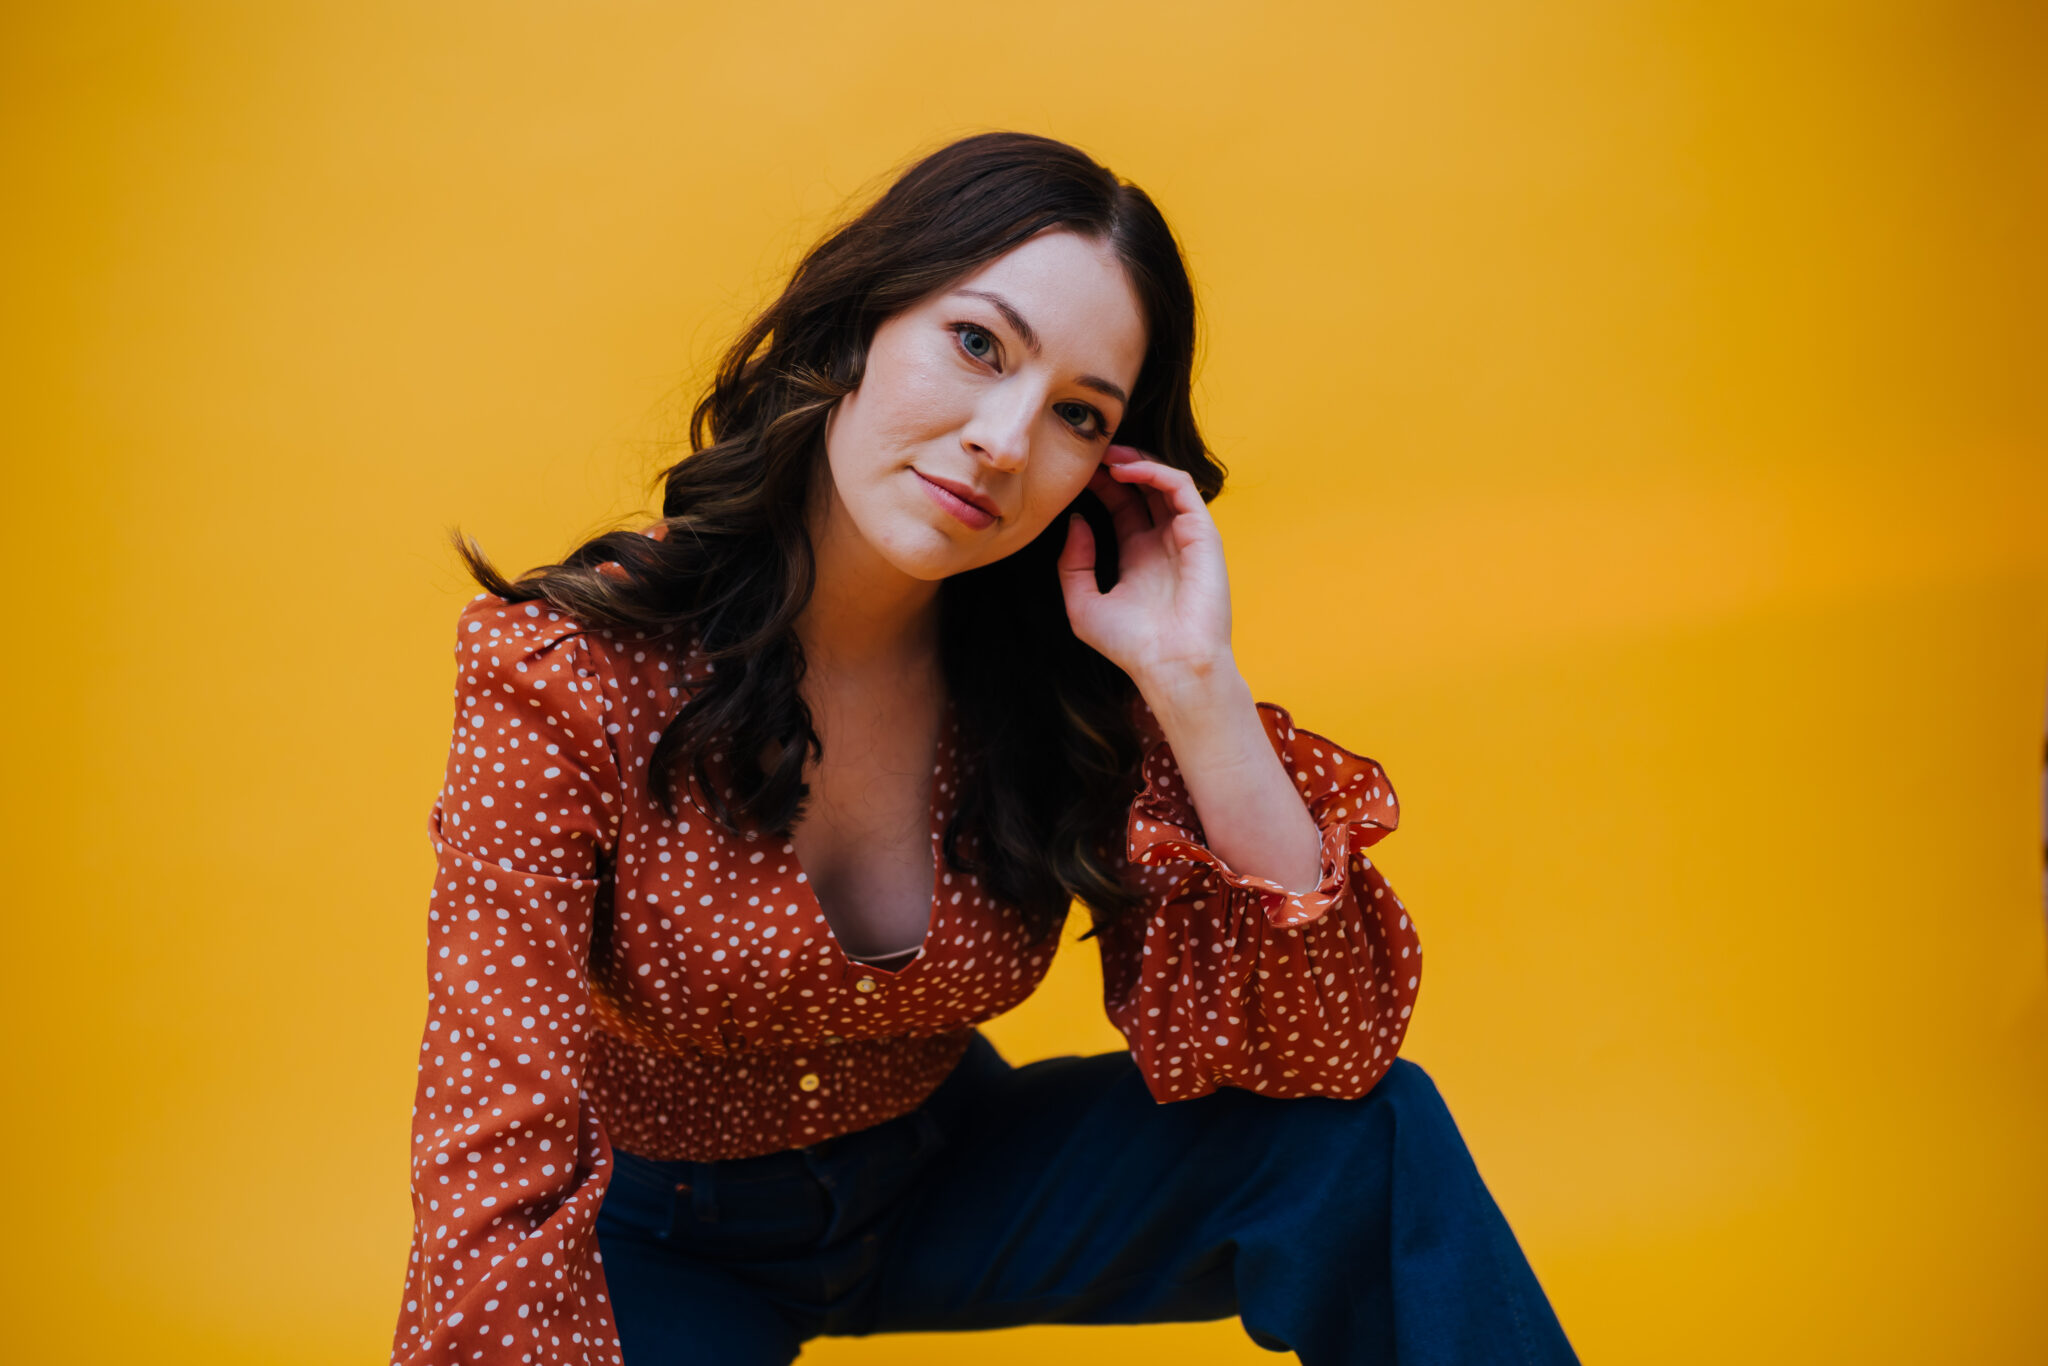 Johanna, wearing a 1970s inspired ruffle top and wide leg jeans, poses with her arm resting on her knee and tilts her head sideways with a smile